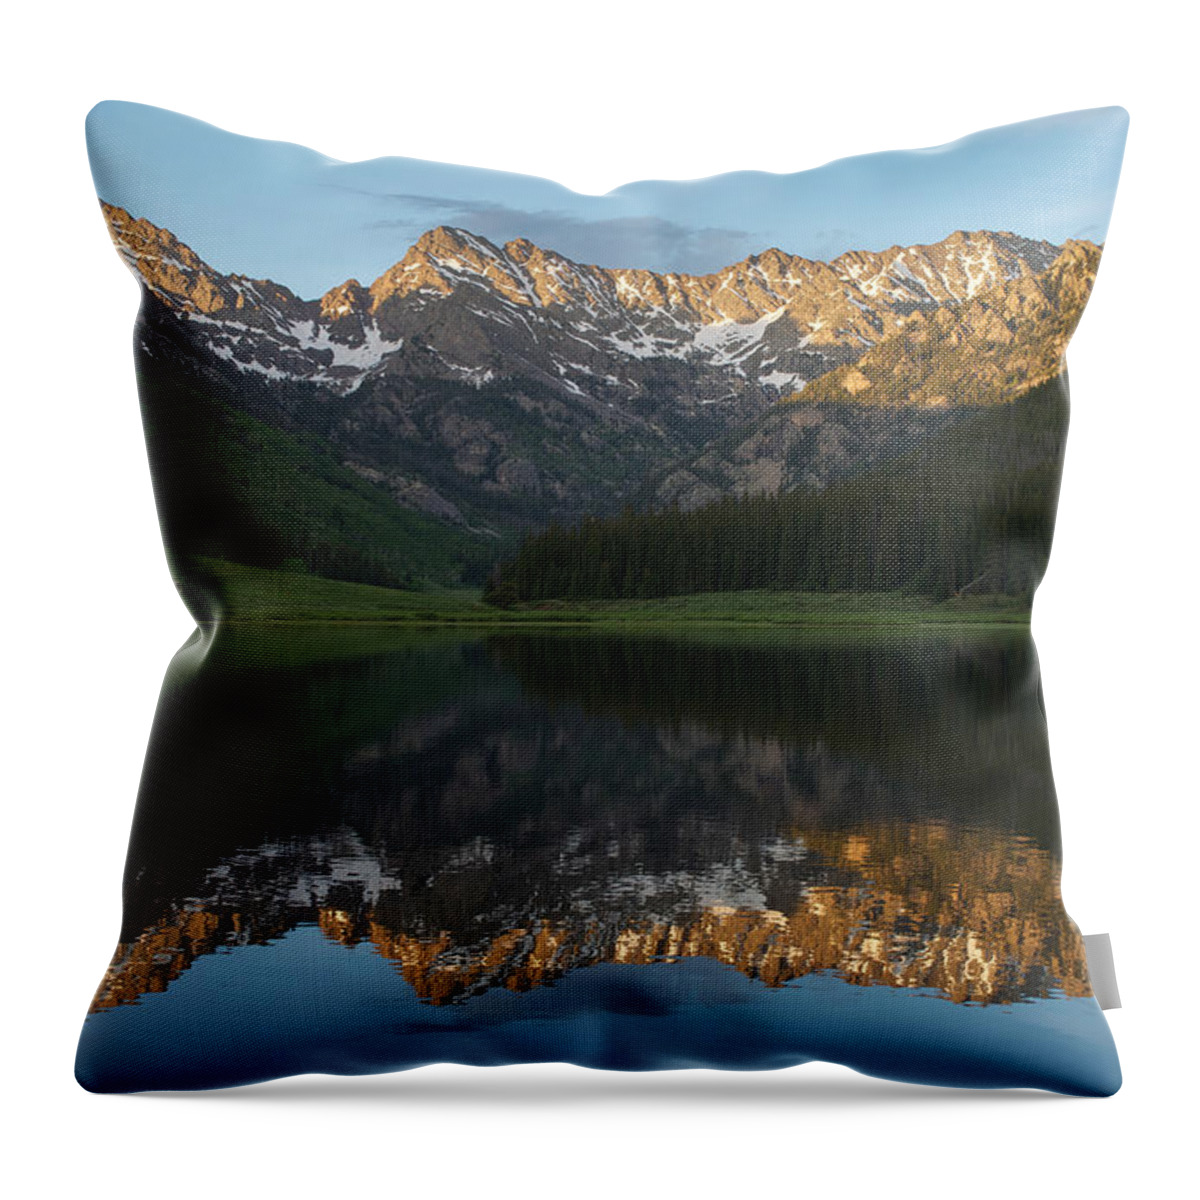 Colorado Throw Pillow featuring the photograph Colorado Sunset - Piney Lake by Aaron Spong